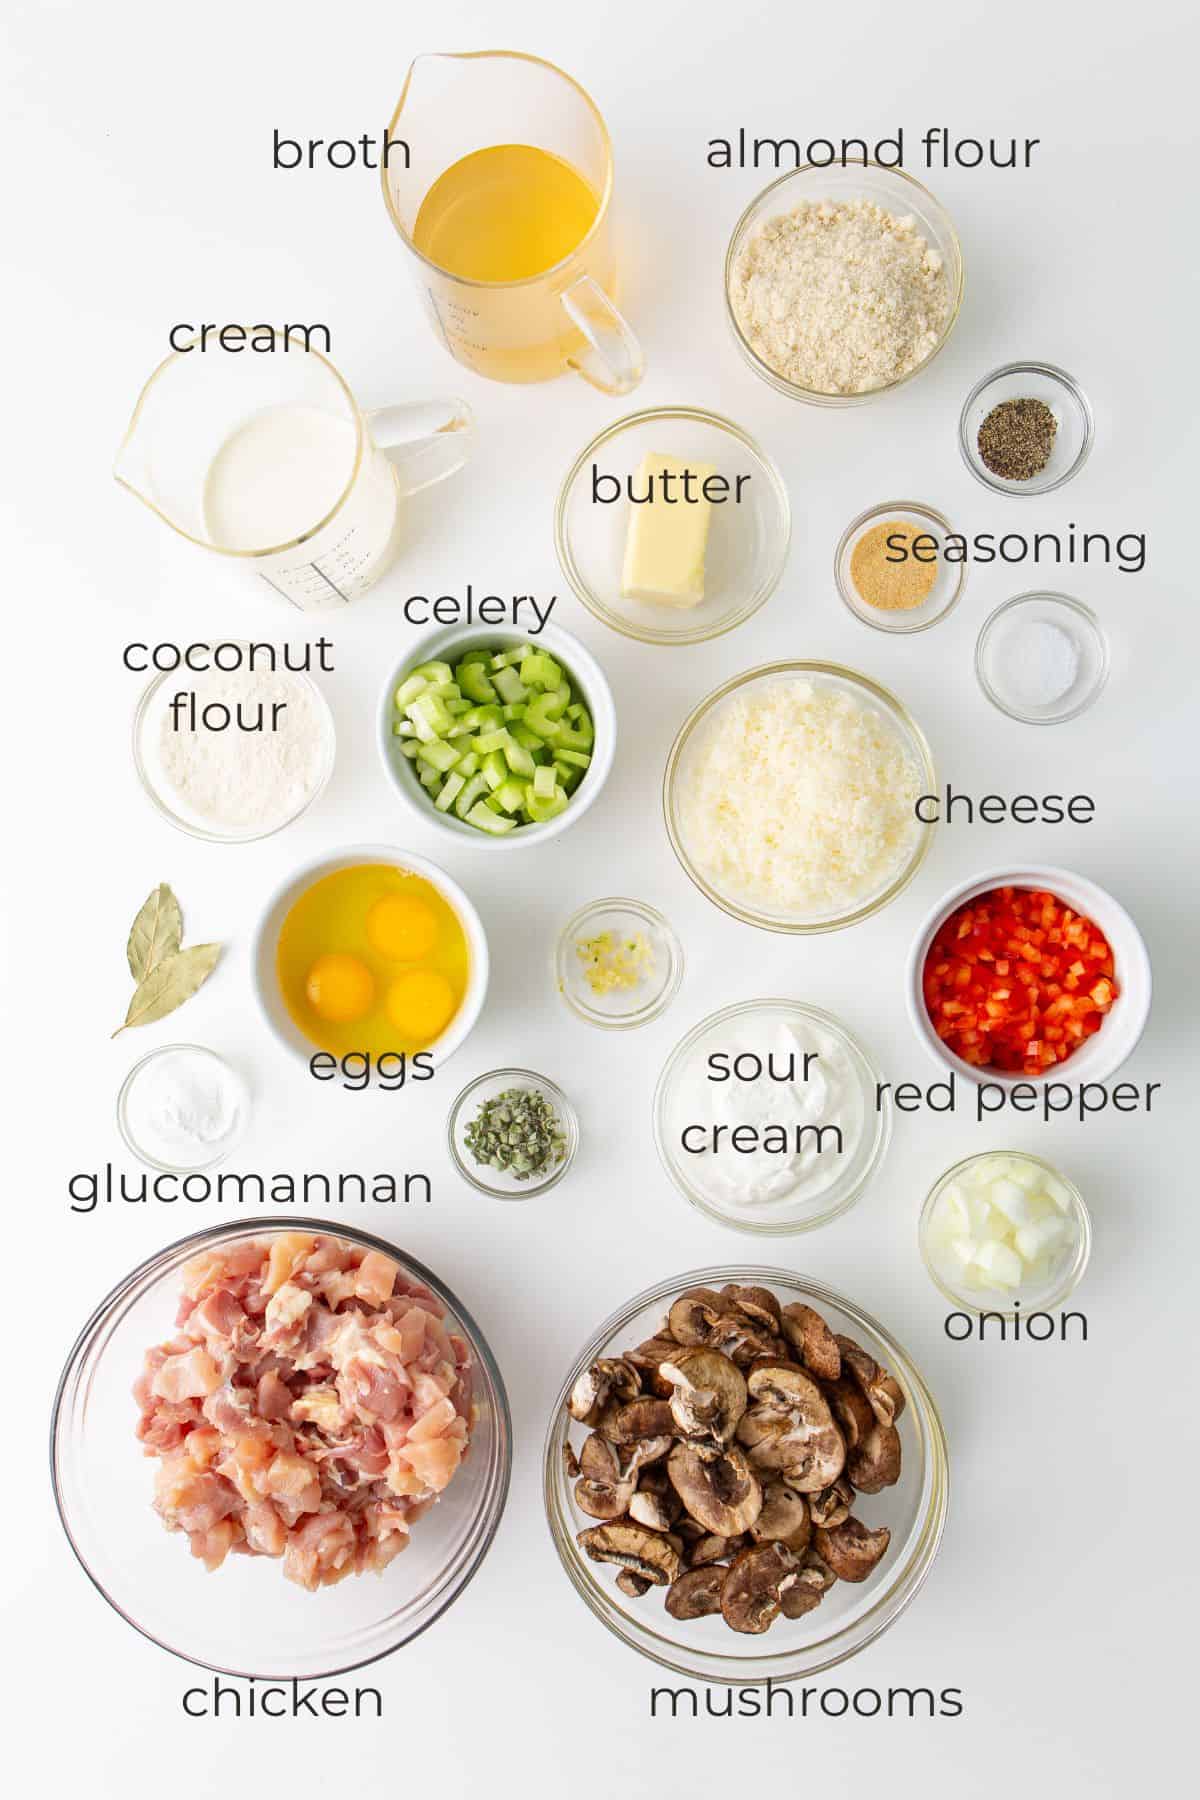 Top down image of ingredients for Keto Chicken Pot Pie.